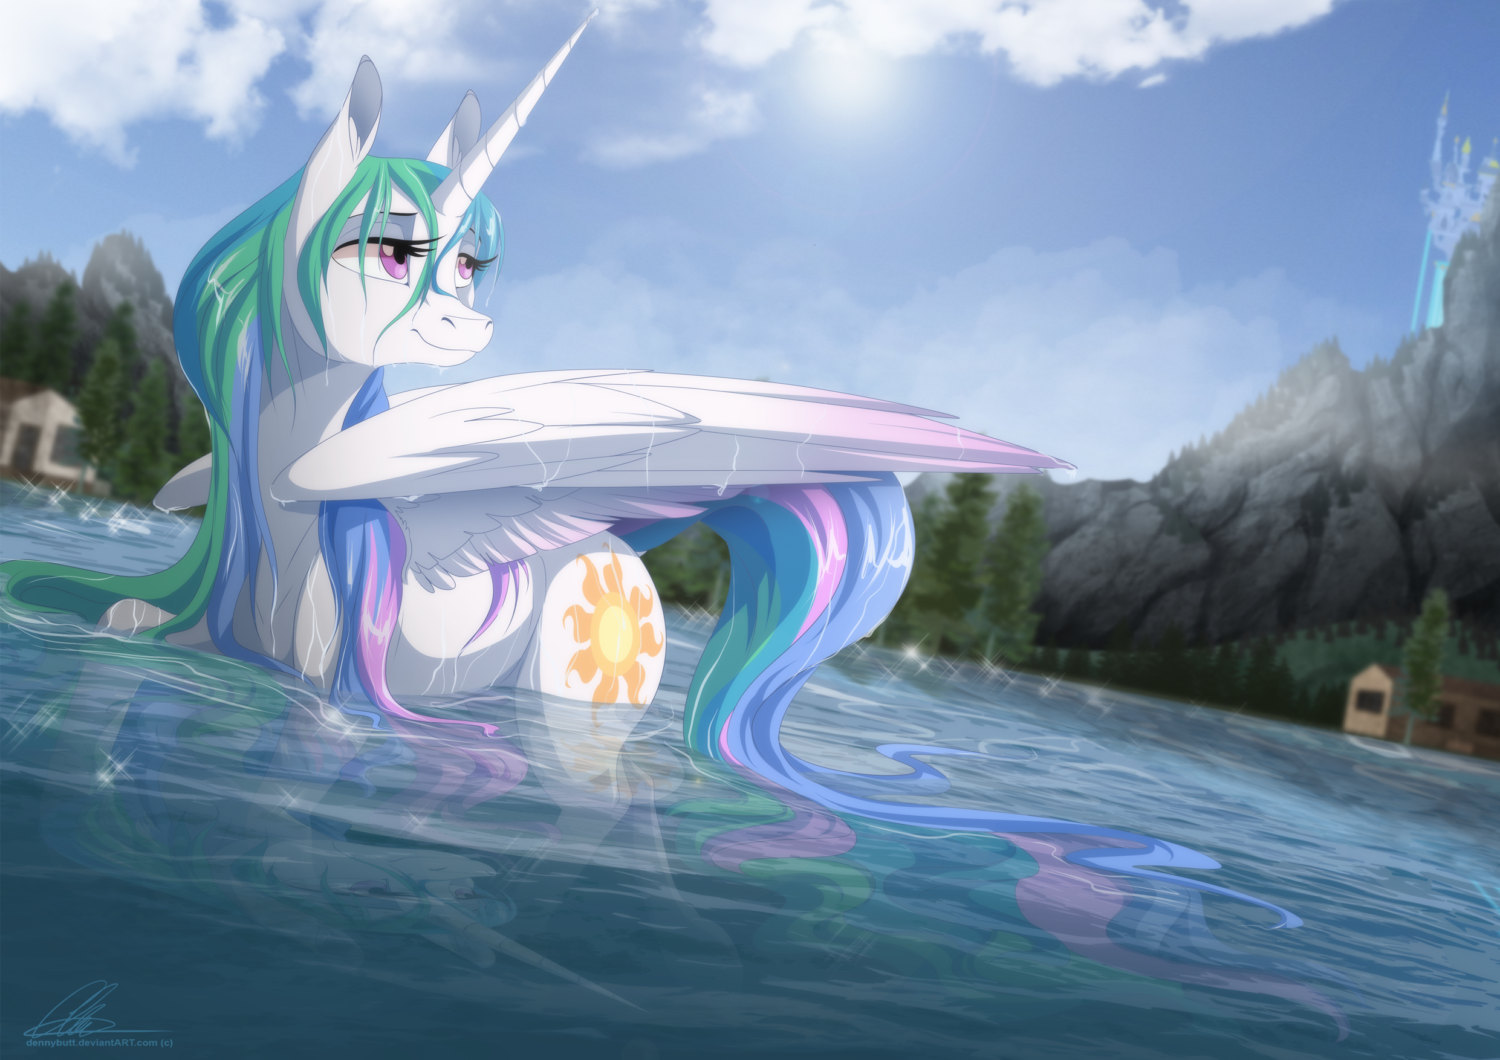 Celestia's Day by Claire Revell